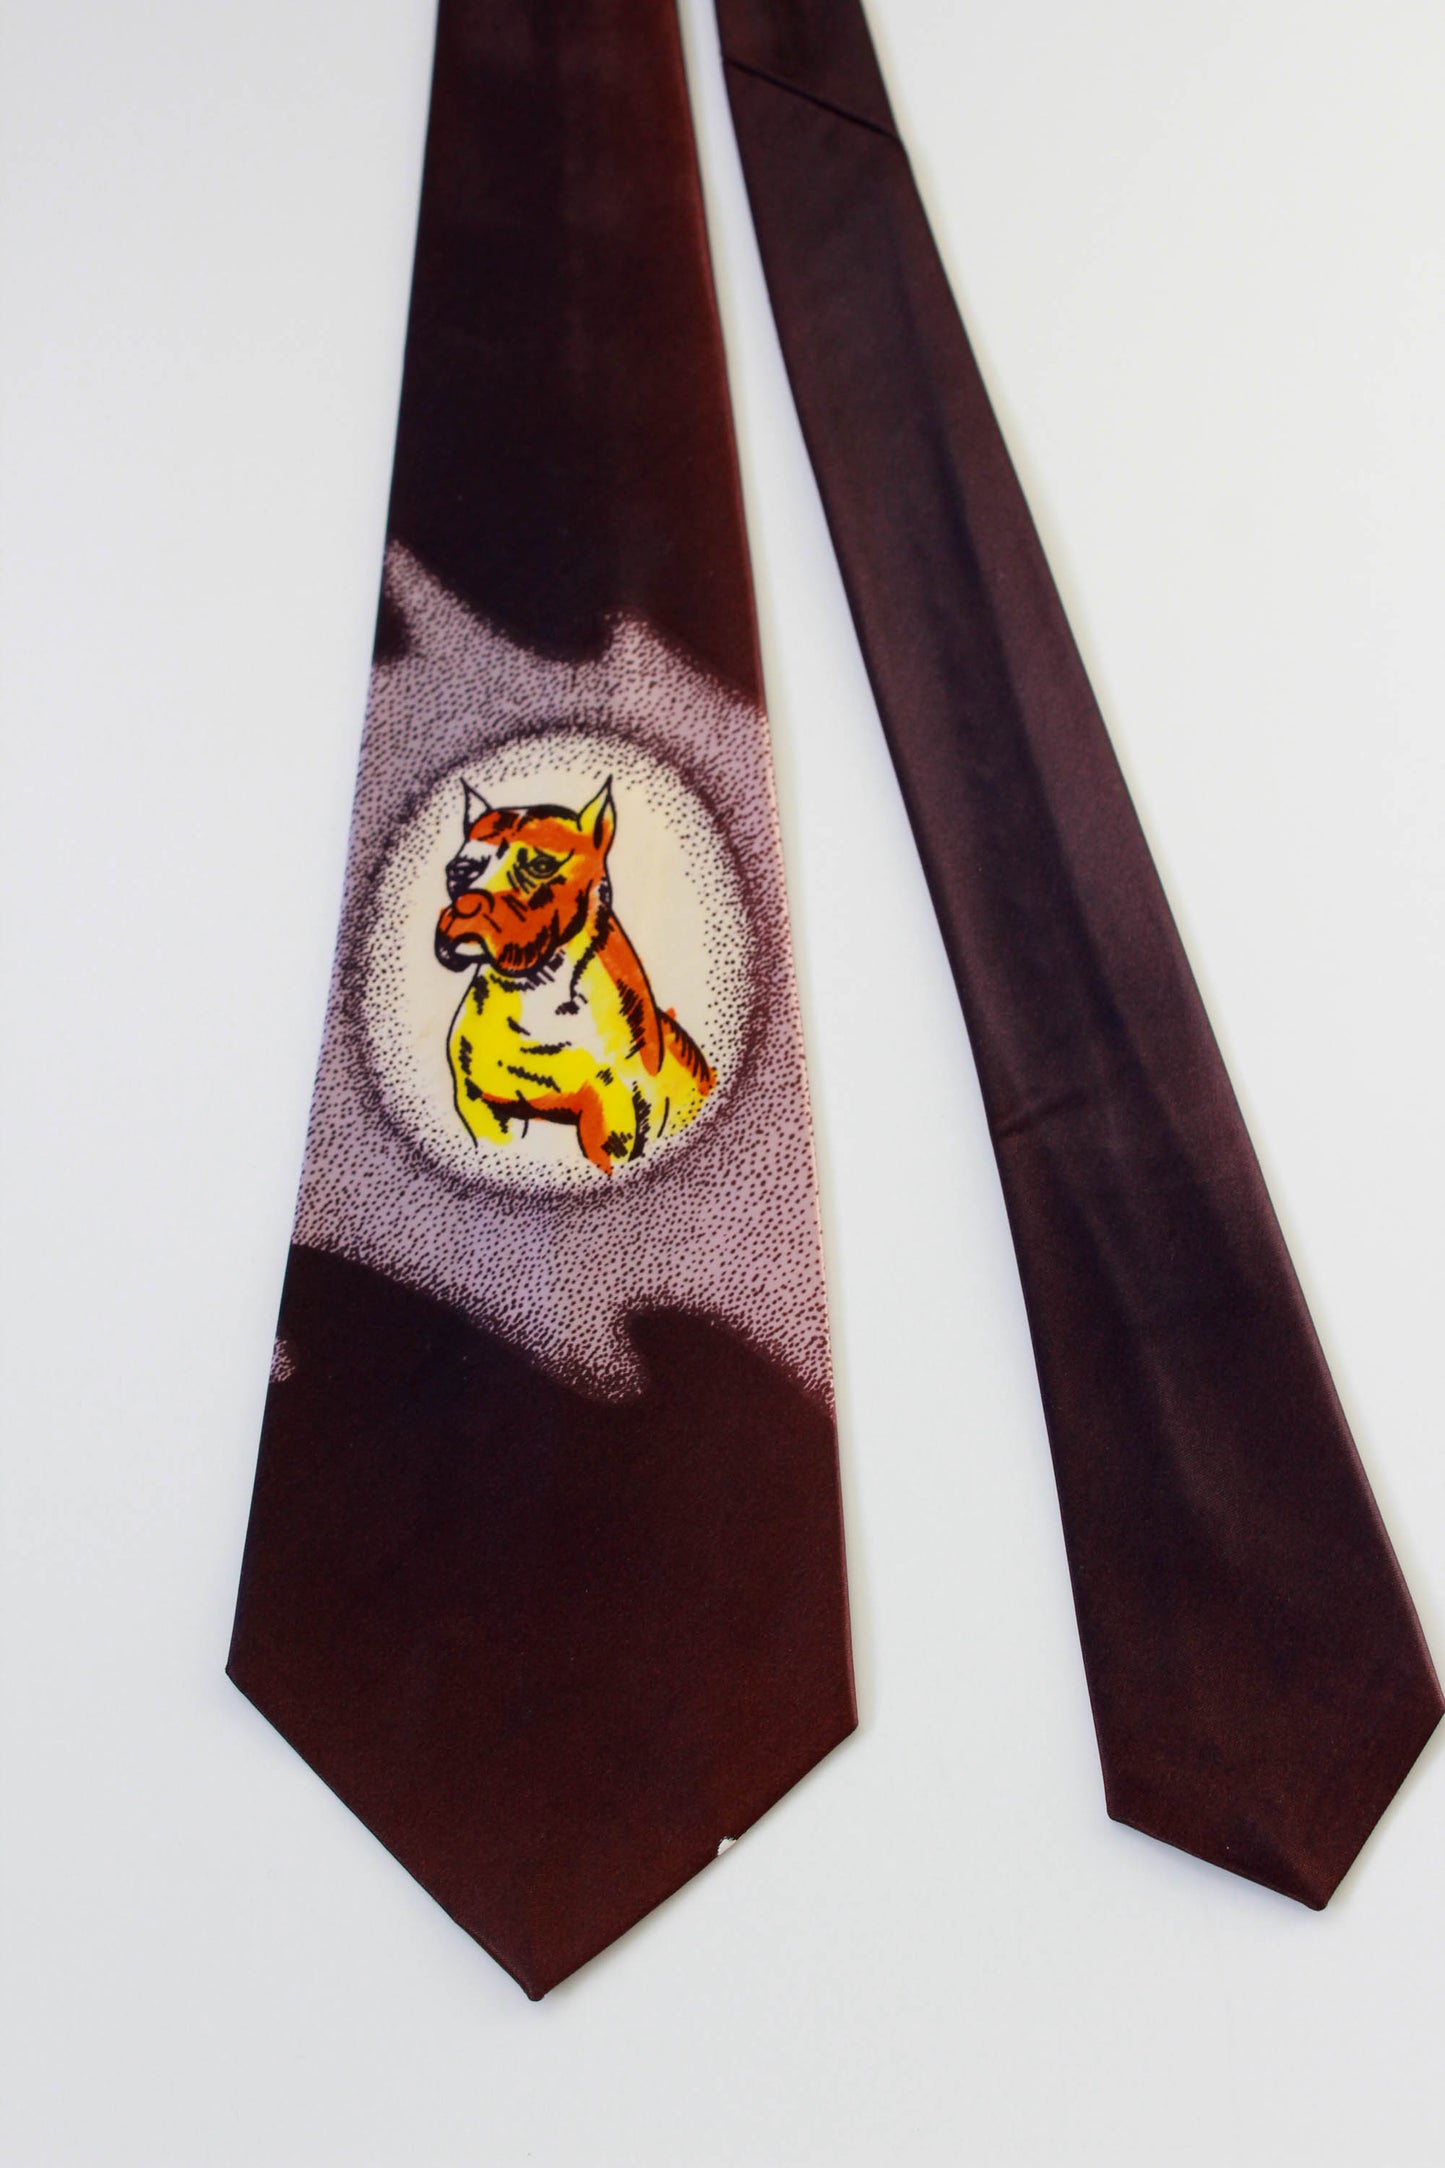 1940s rayon necktie with handpainted bulldog, purple background wide tongue vintage tie